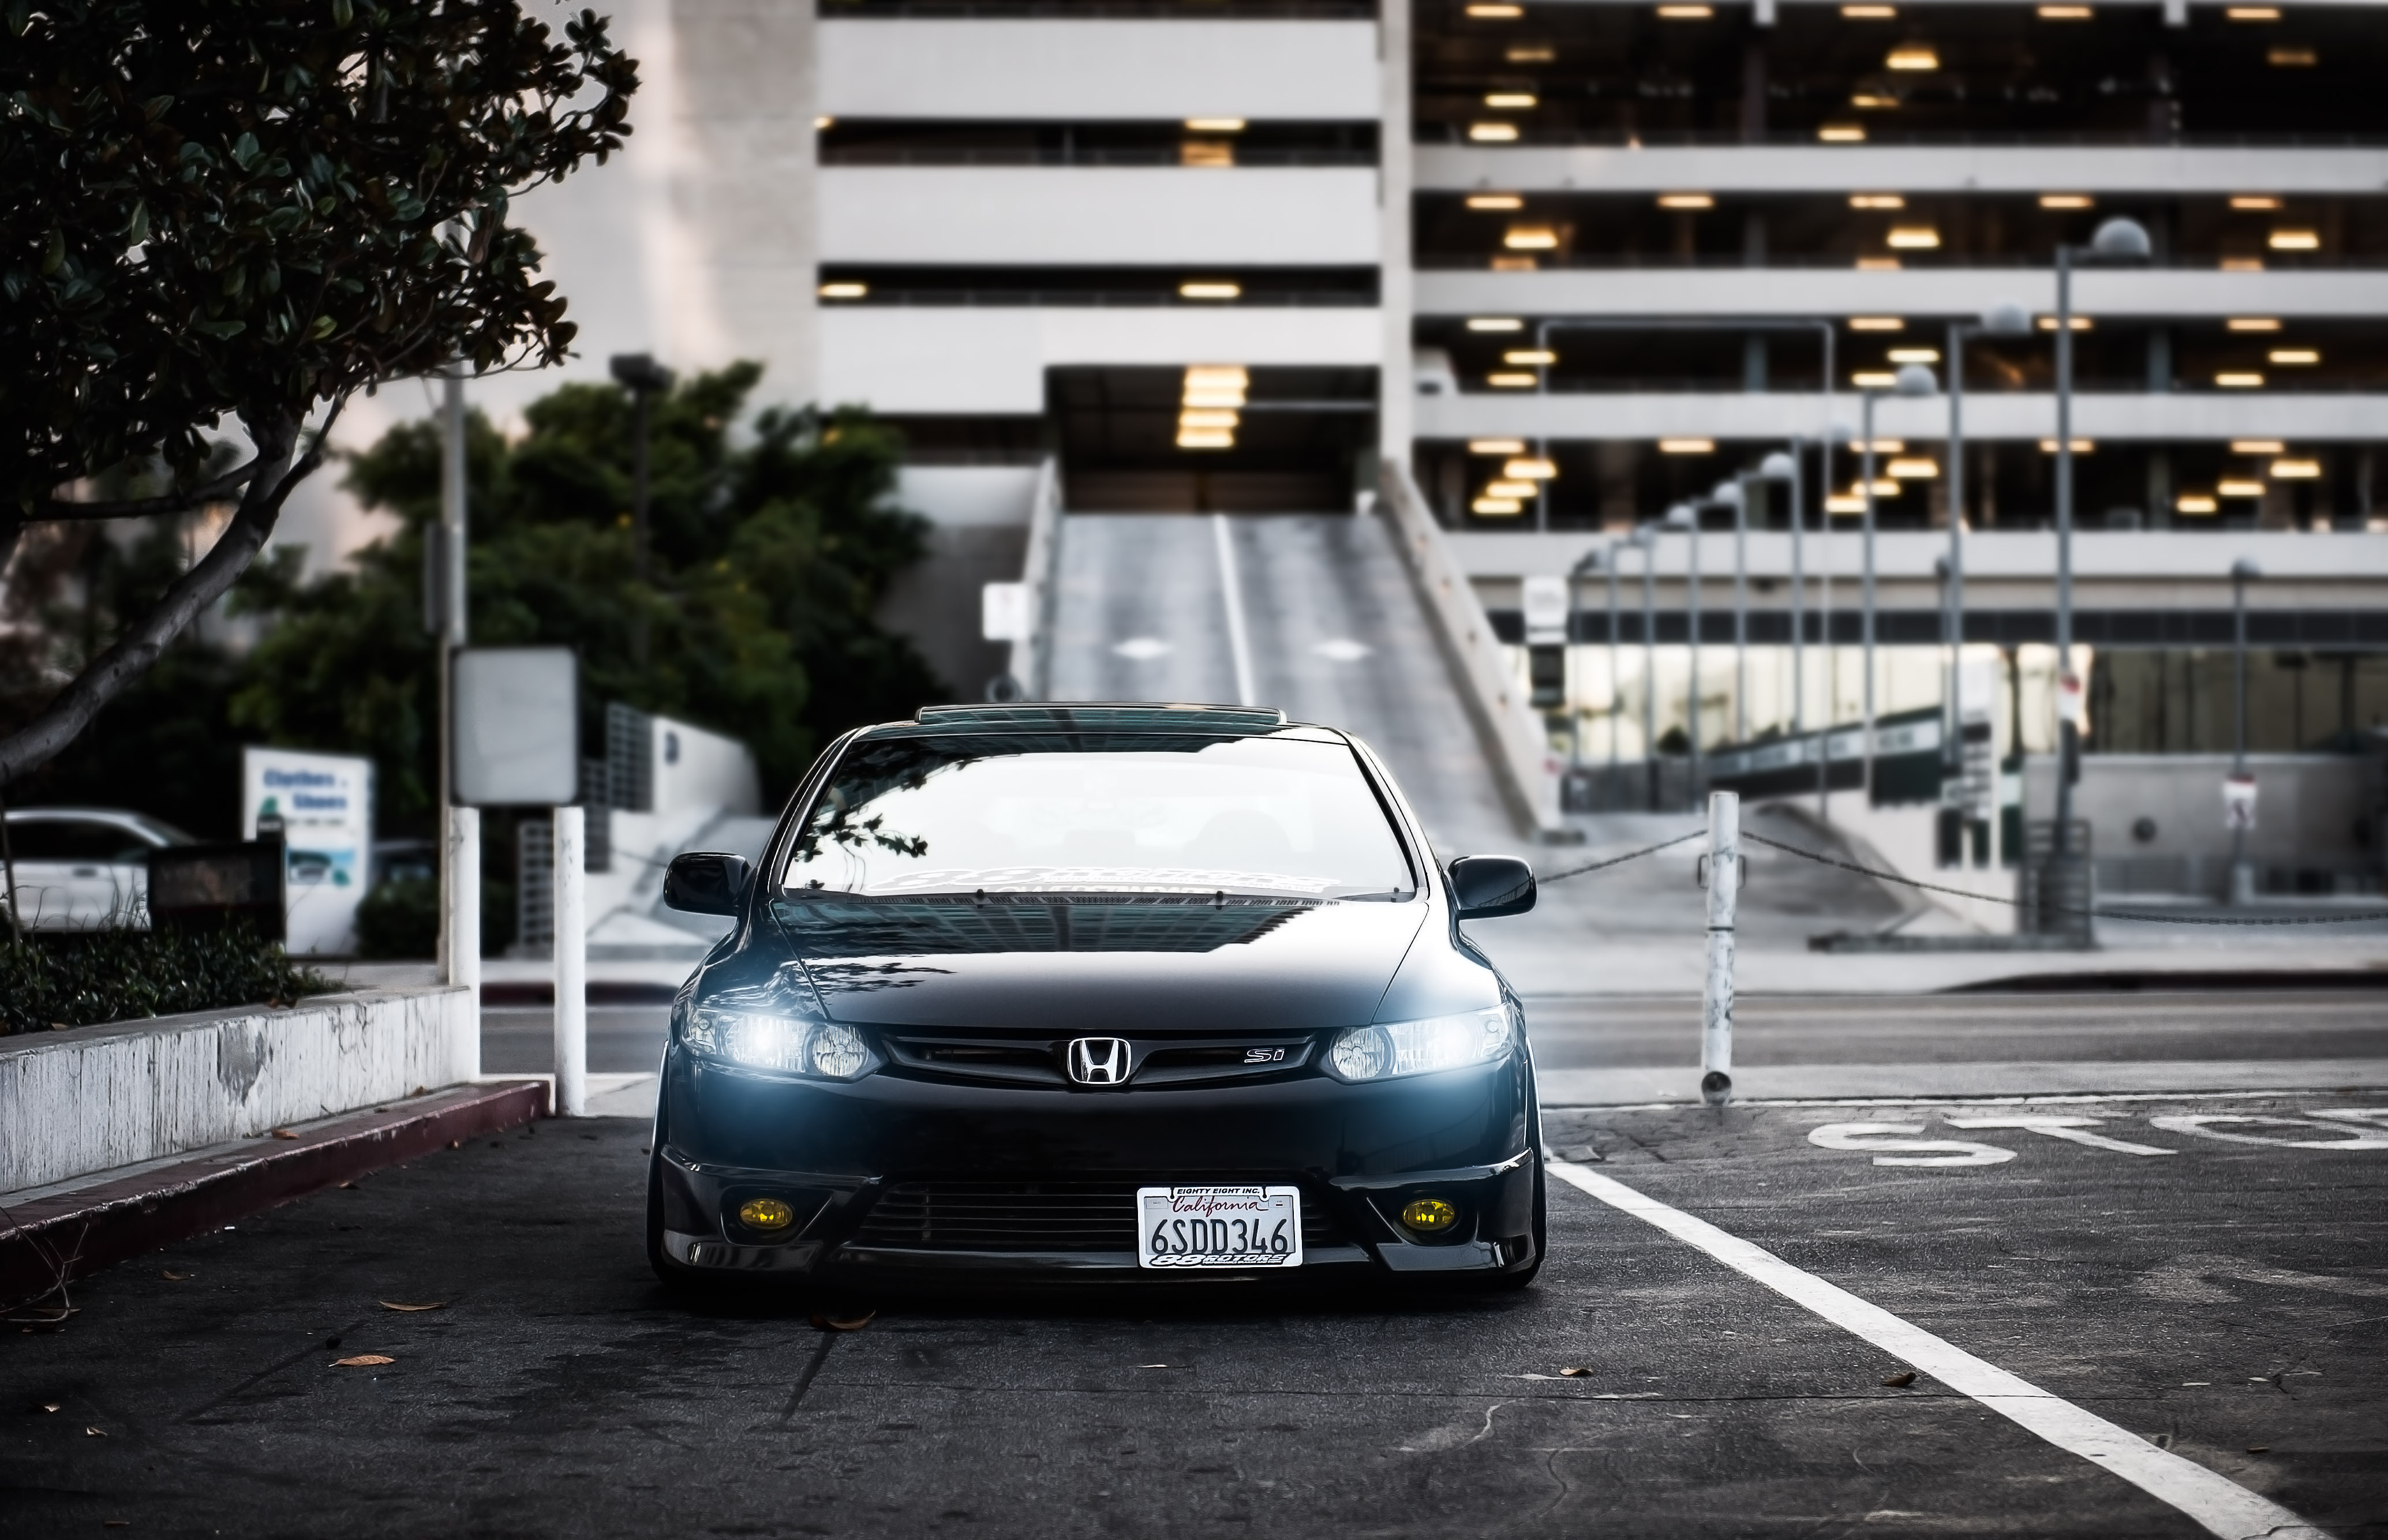 107186 download wallpaper honda, cars, black, city, front view, civic, si screensavers and pictures for free